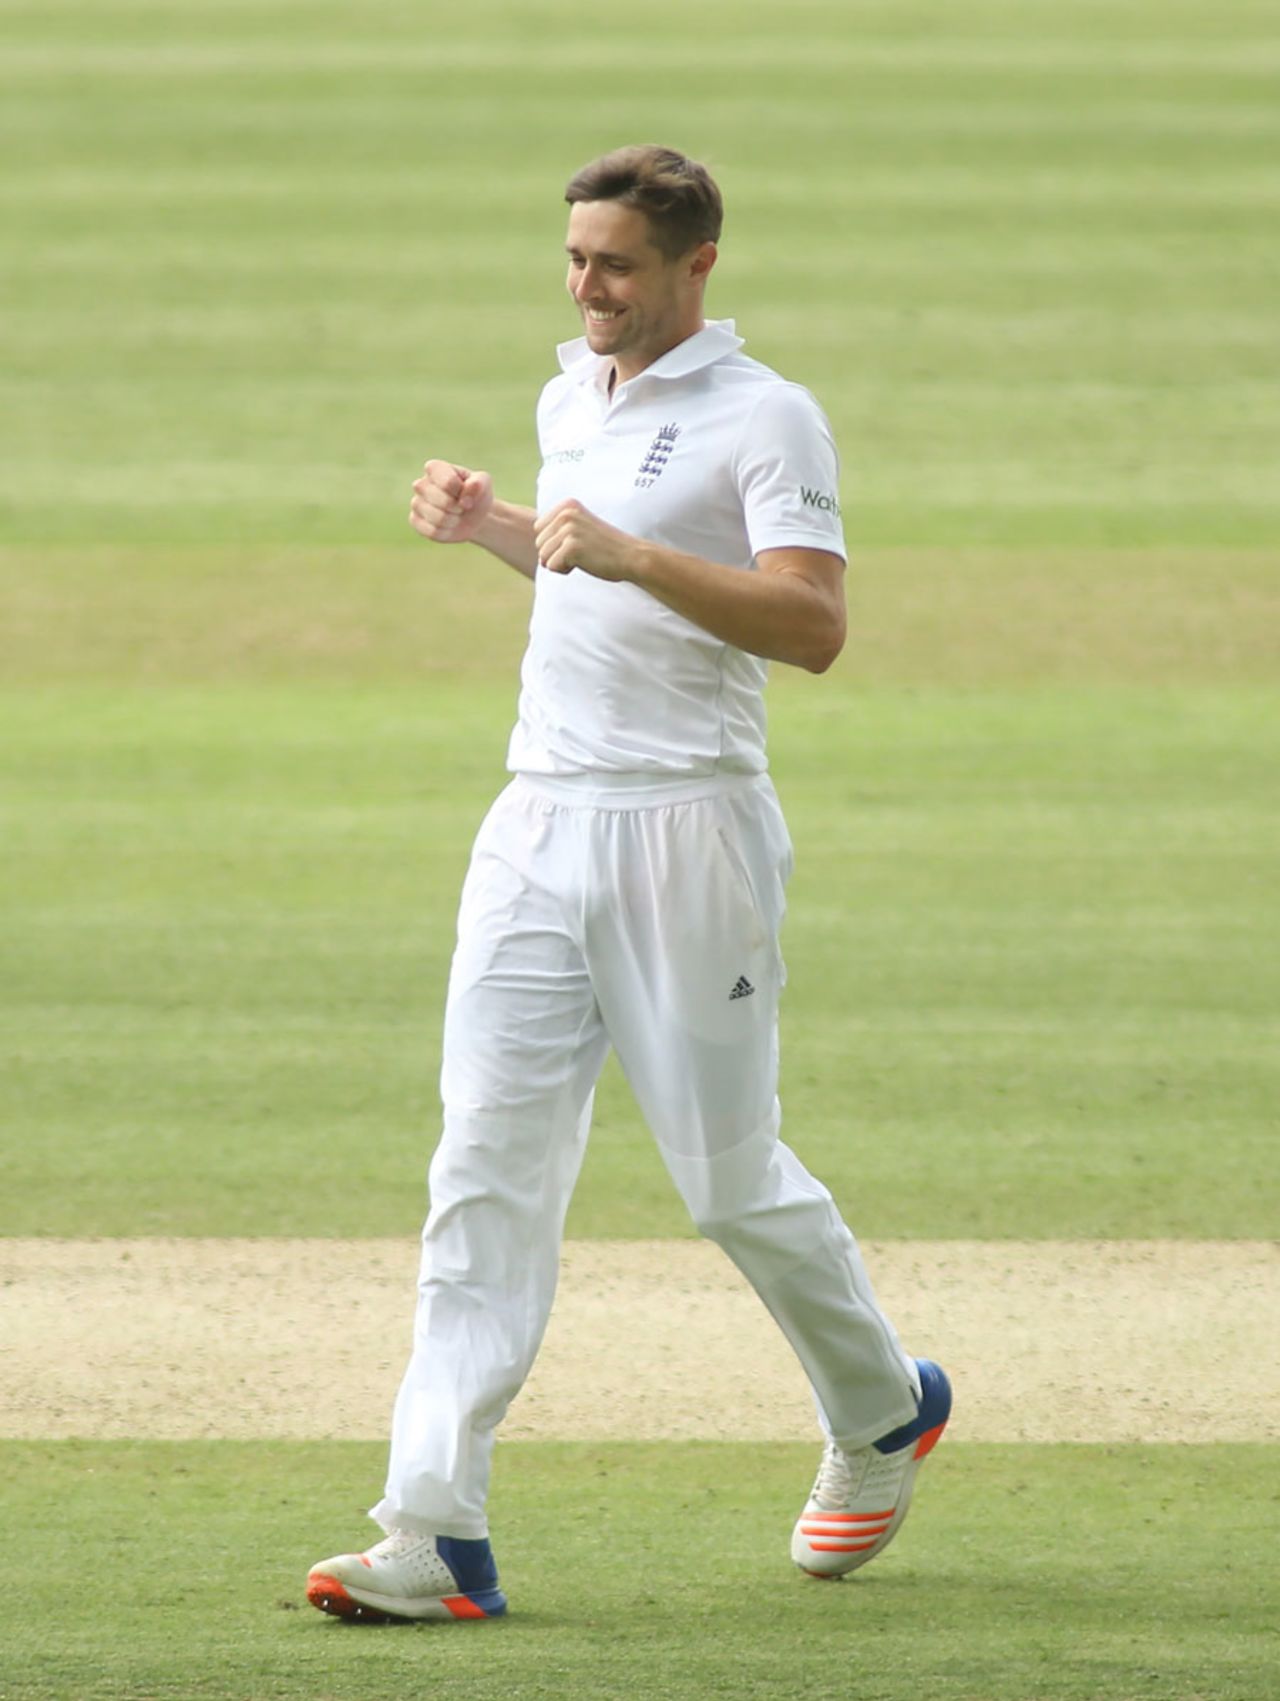 Chris Woakes finished off the Sri Lanka innings, England v Sri Lanka, 3rd Investec Test, Lord's, 3rd day, June 11, 2016